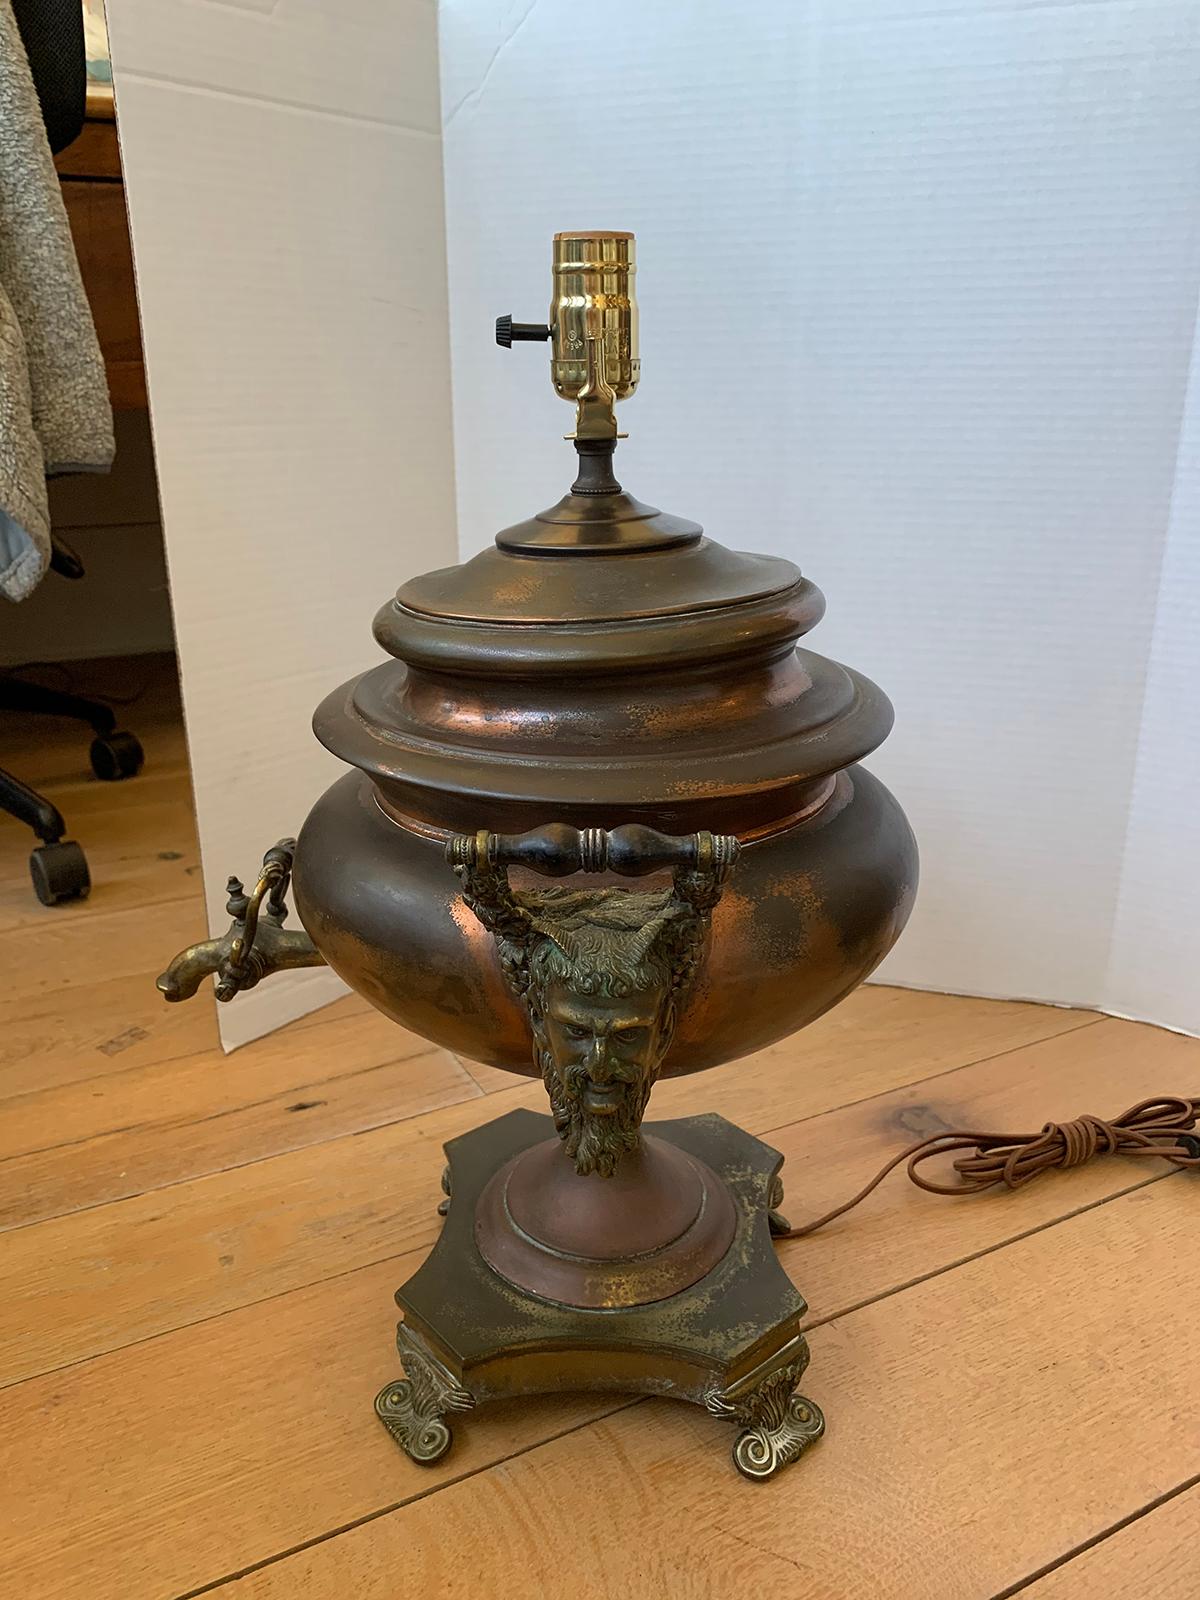 19th-20th century sensational copper and brass hot water urn as lamp
New wiring.